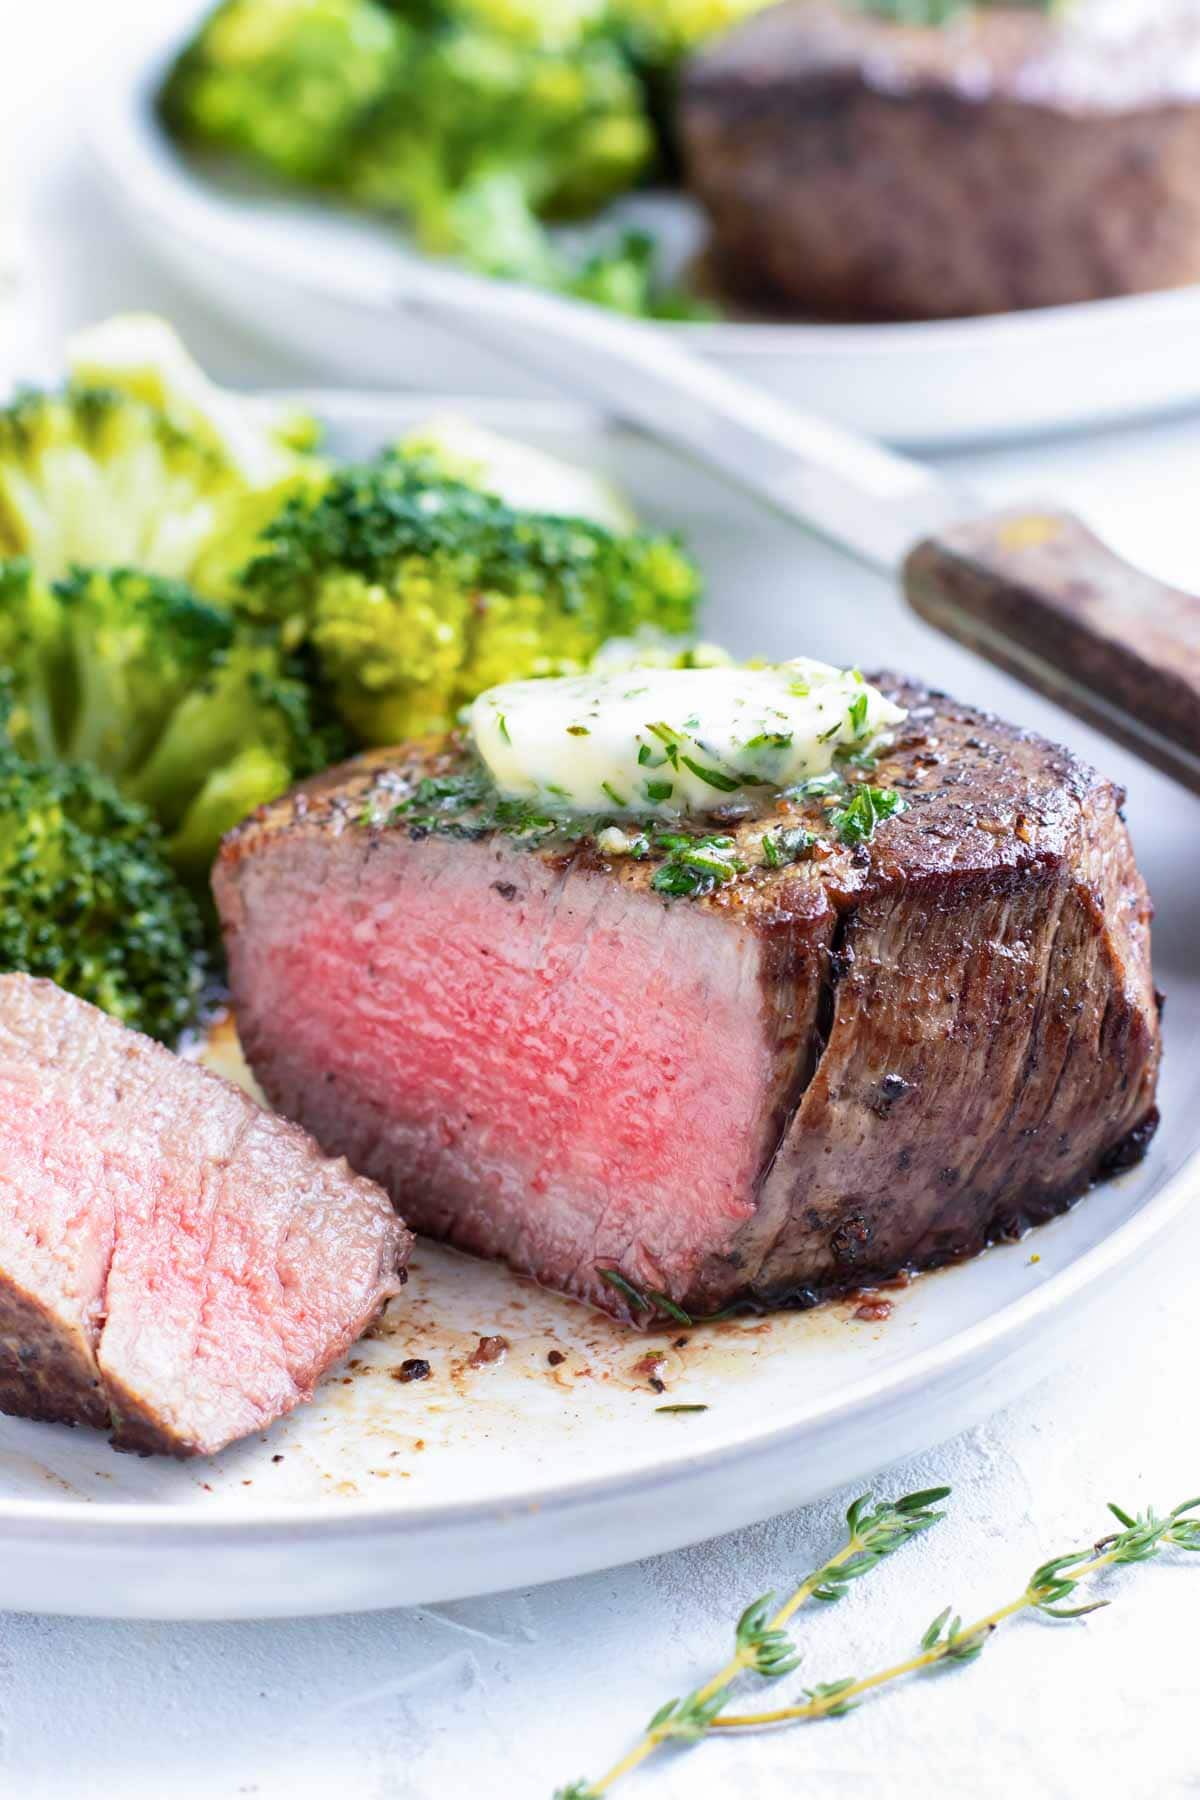 A filet mignon steak that has been cooked to medium-rare on a white plate with a knife and broccoli.